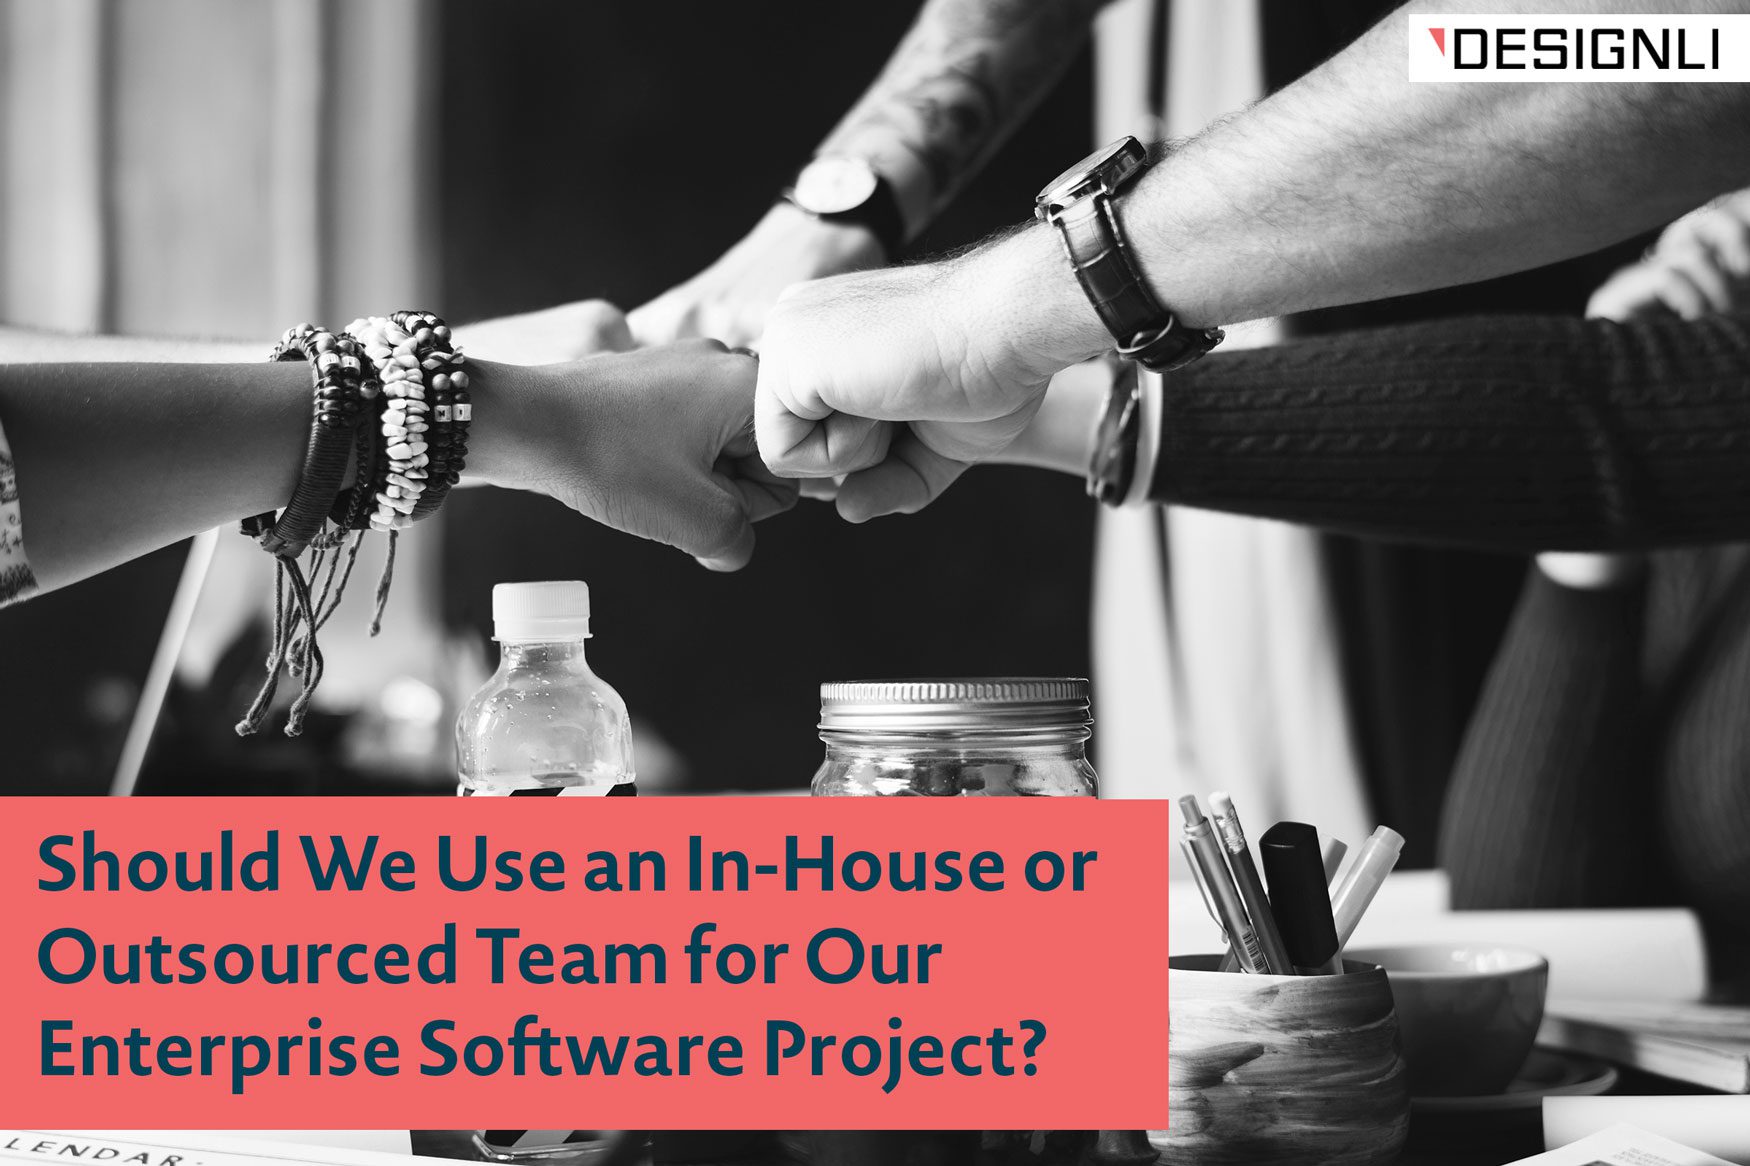 In-House Vs. Outsourced Teams for Enterprise Software Projects